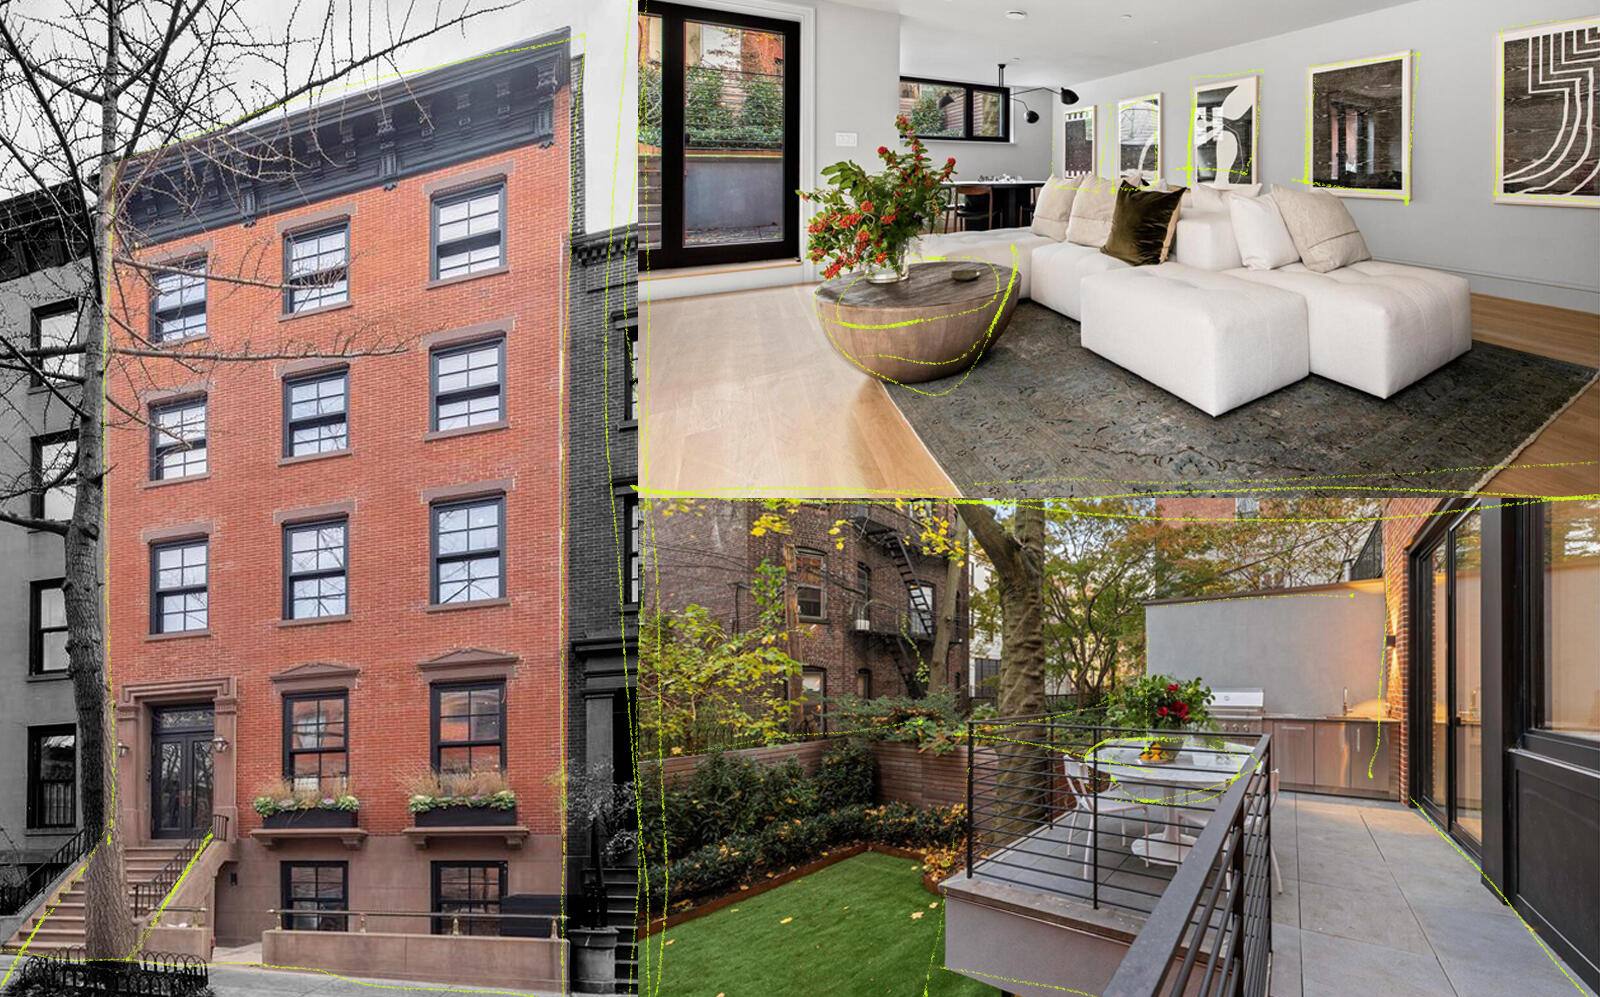 This Brooklyn Heights home went into contract at $2,184 per square foot. (Compass)